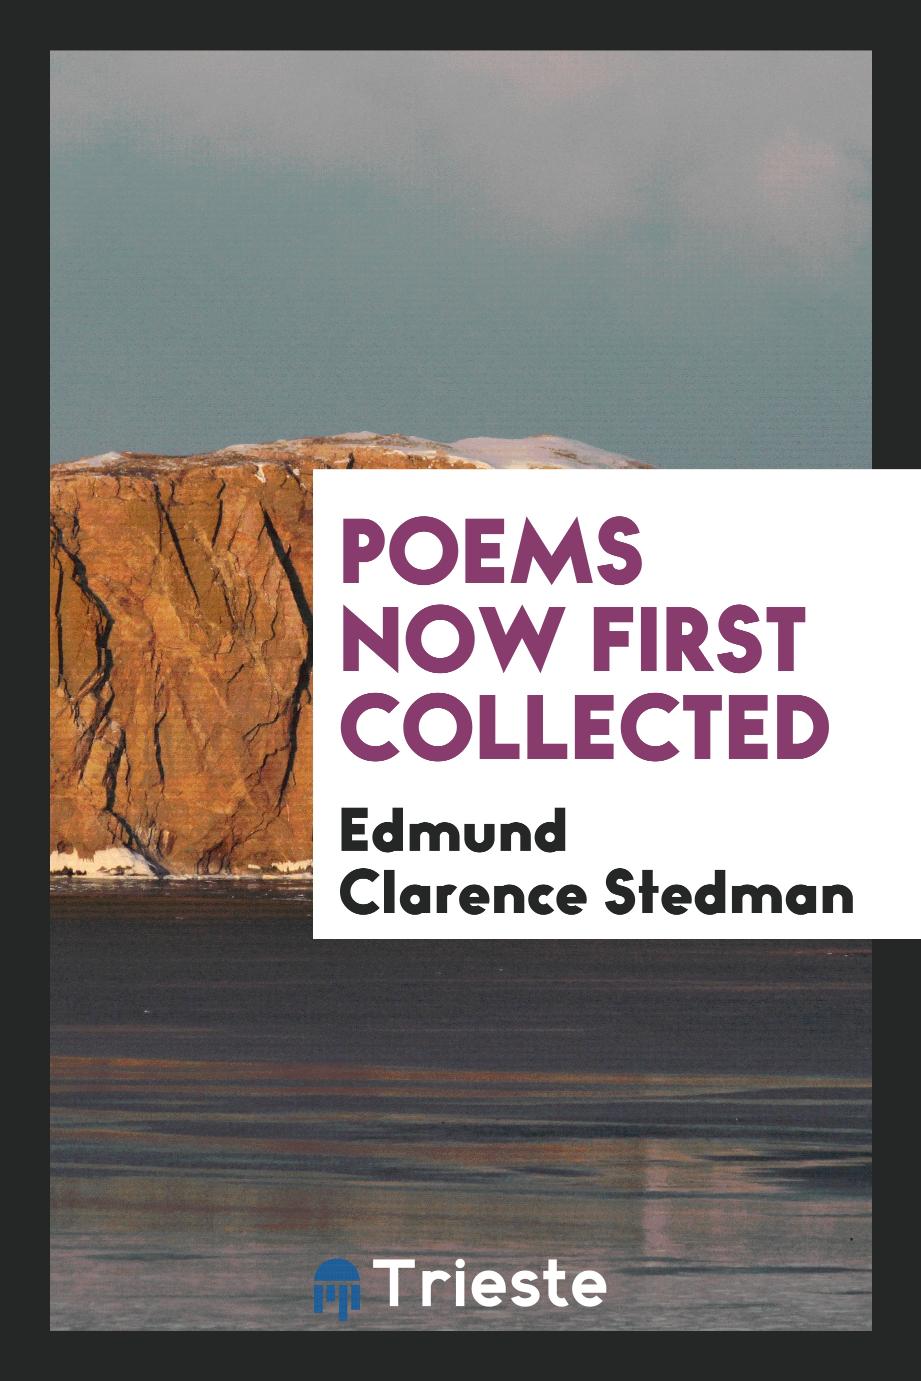 Poems now first collected